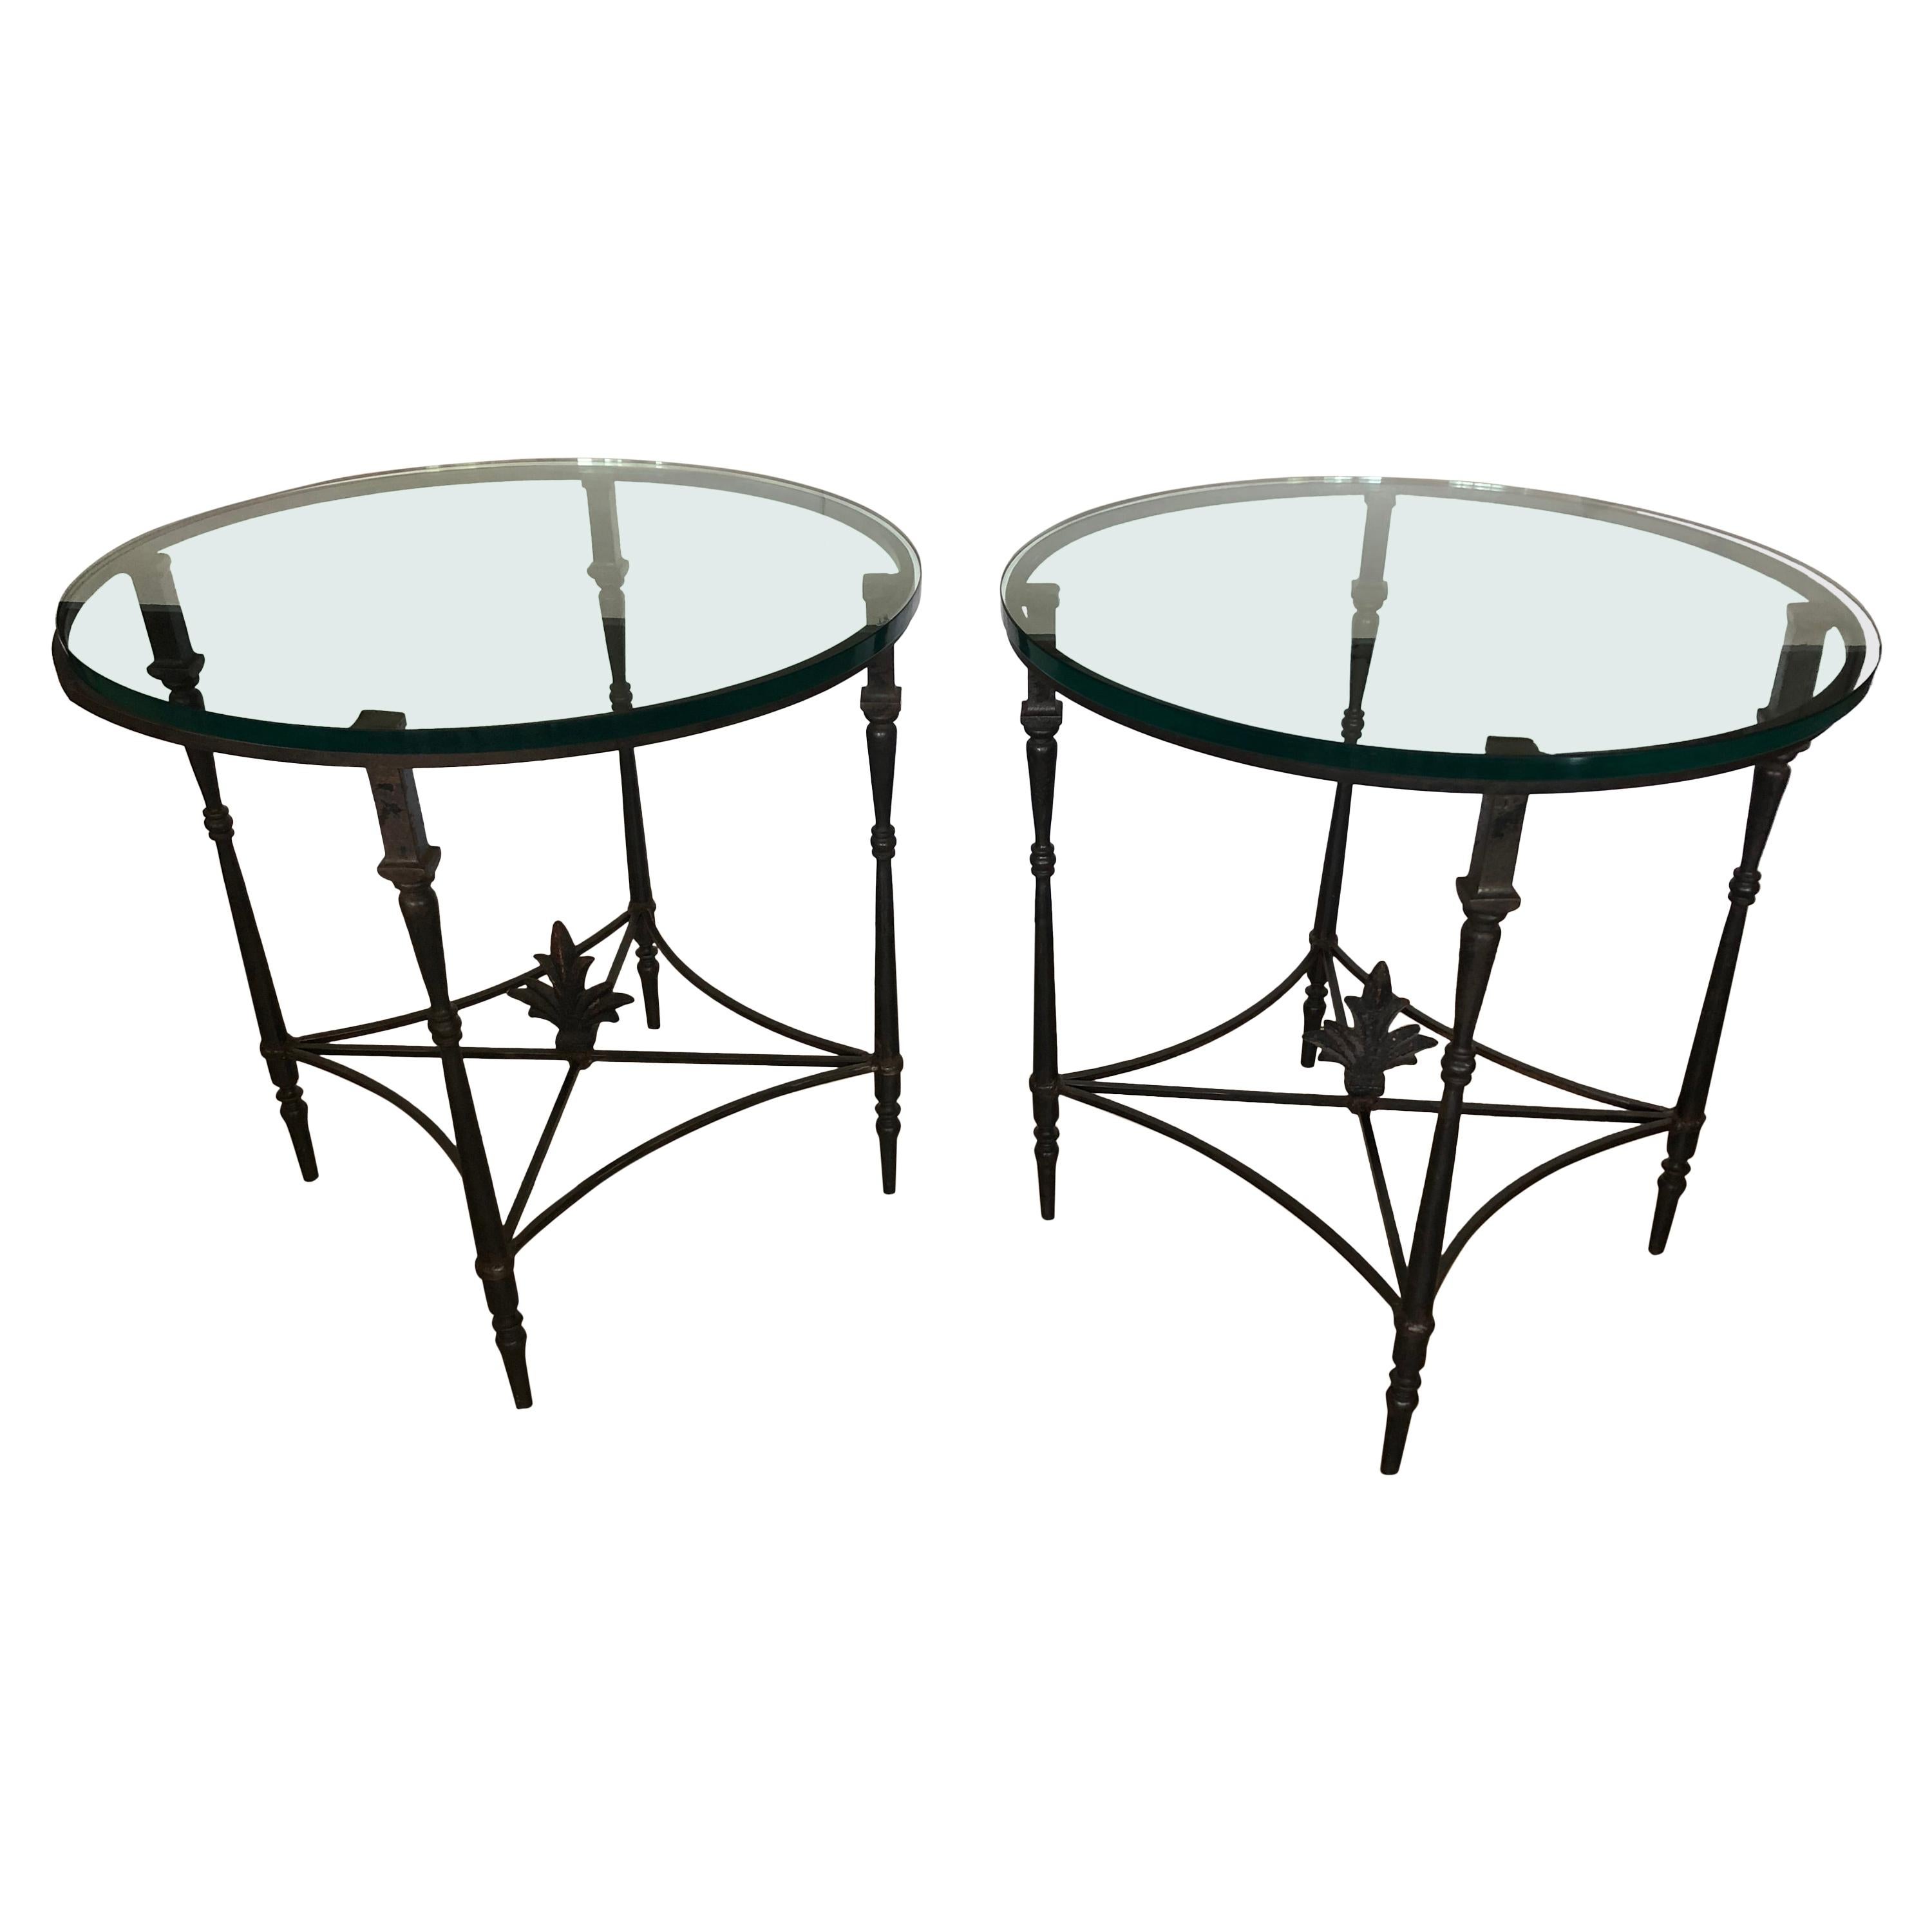 Versatile Pair of Iron and Glass Round Side End Tables with Fleur di Lis Finials